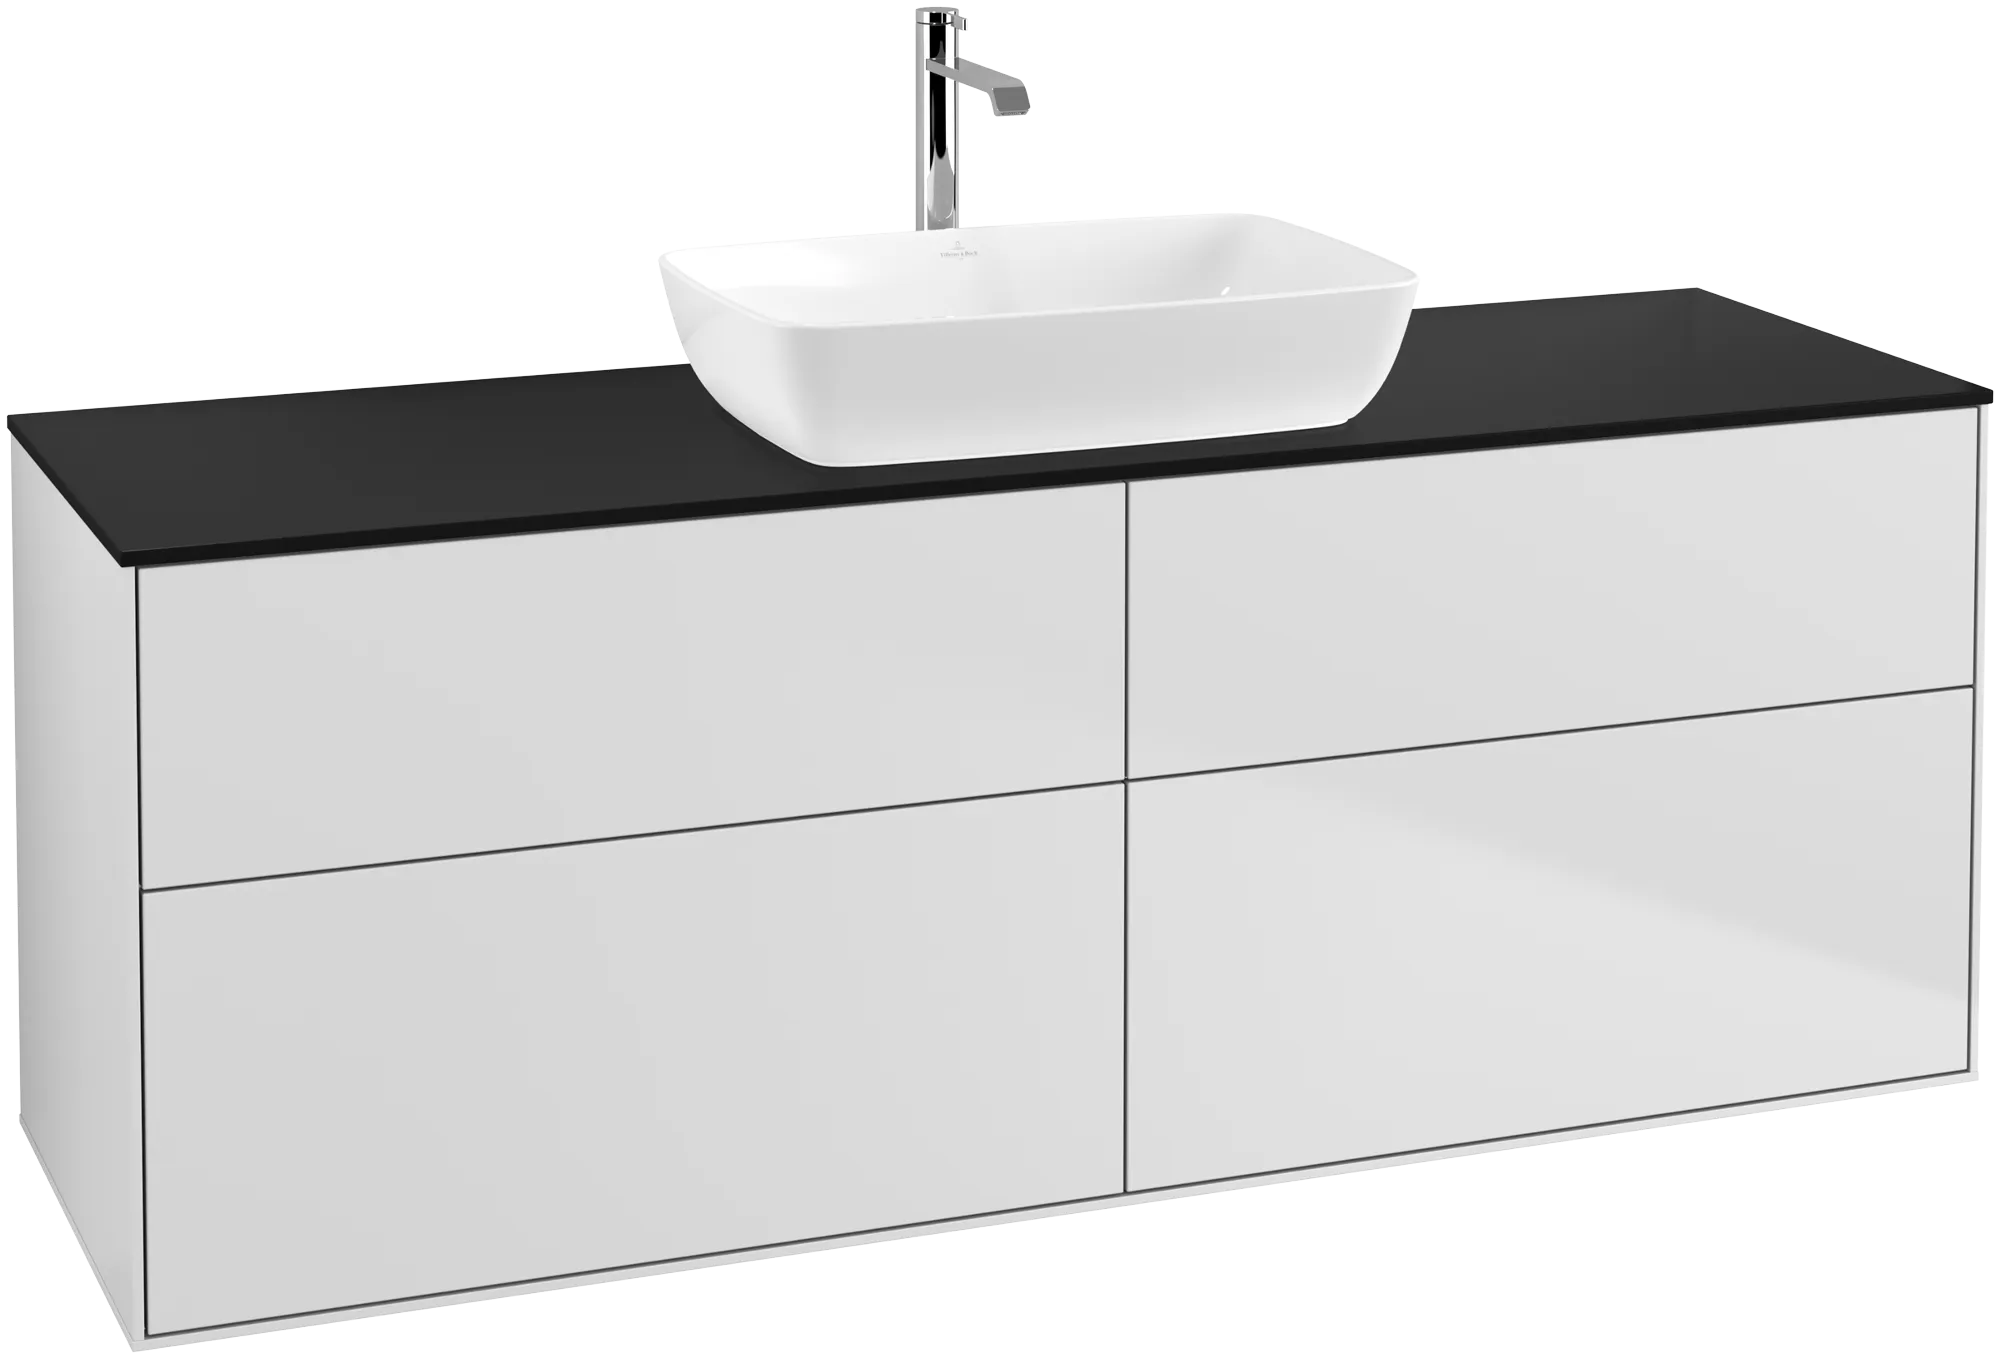 VILLEROY BOCH Finion Vanity unit, with lighting, 4 pull-out compartments, 1600 x 603 x 501 mm, White Matt Lacquer / Glass Black Matt #G85200MT resmi